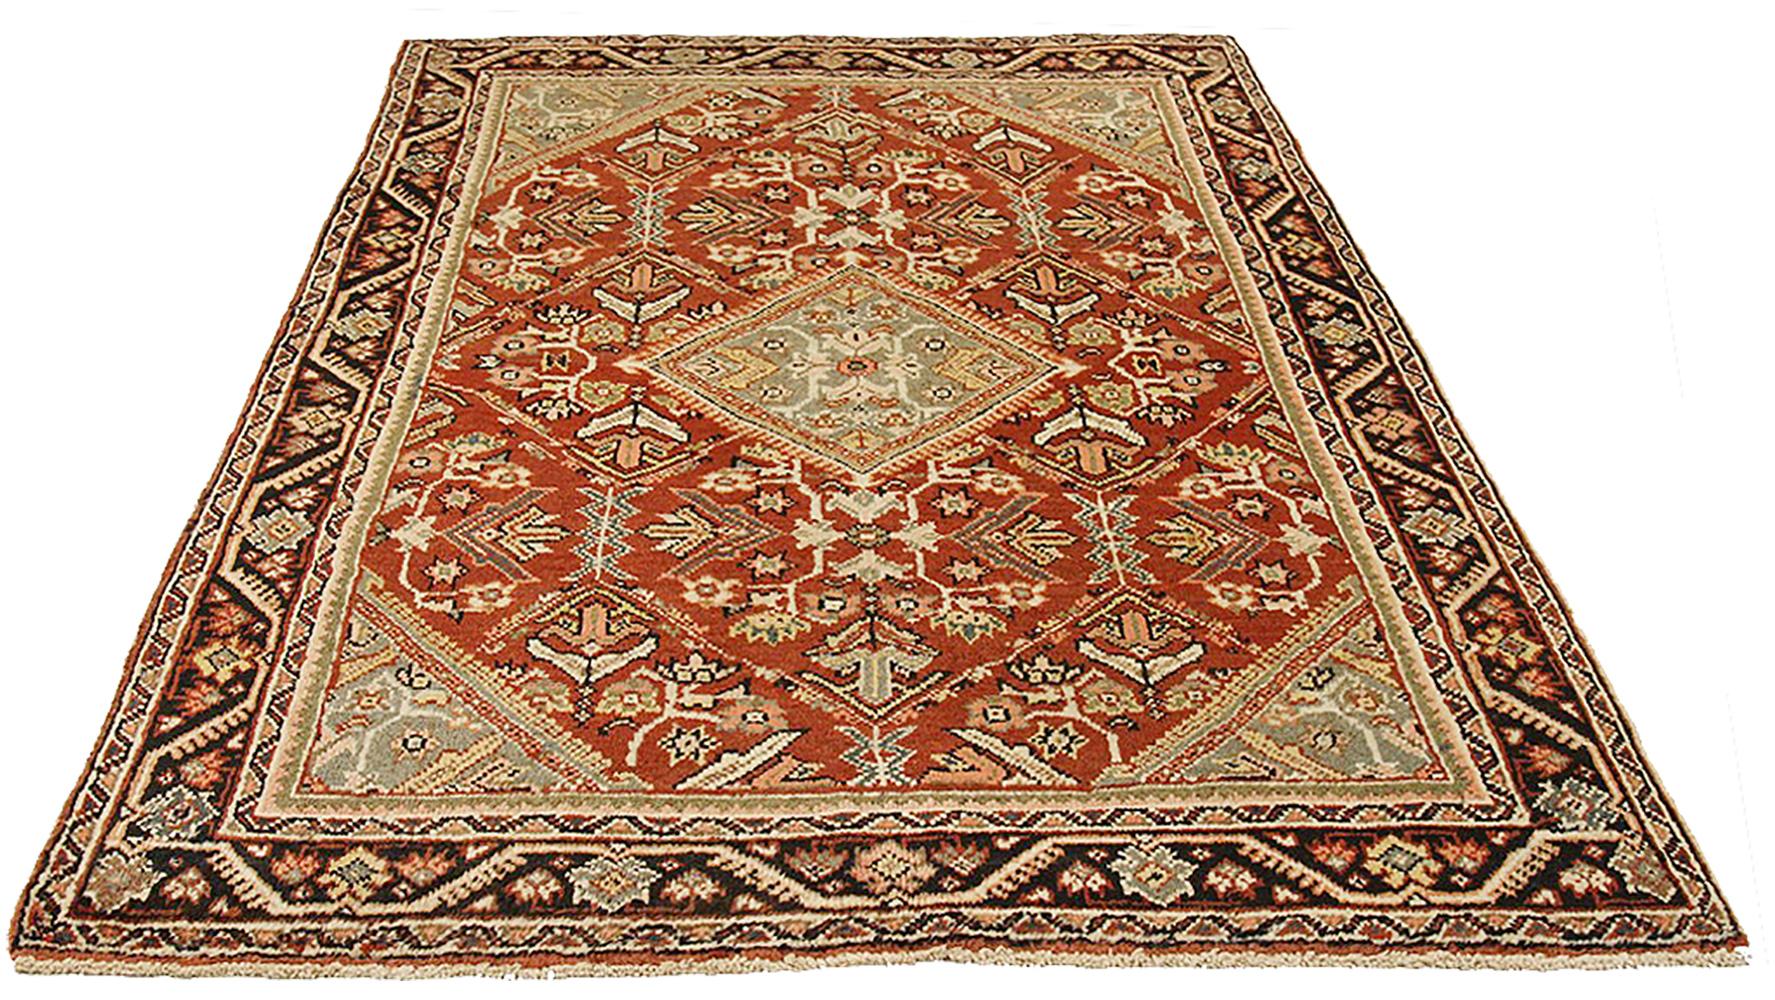 Antique Persian rug handwoven from the finest sheep’s wool and colored with all-natural vegetable dyes that are safe for humans and pets. It’s a traditional Mahal design featuring floral details in beige and gray over a red field. It’s a lovely